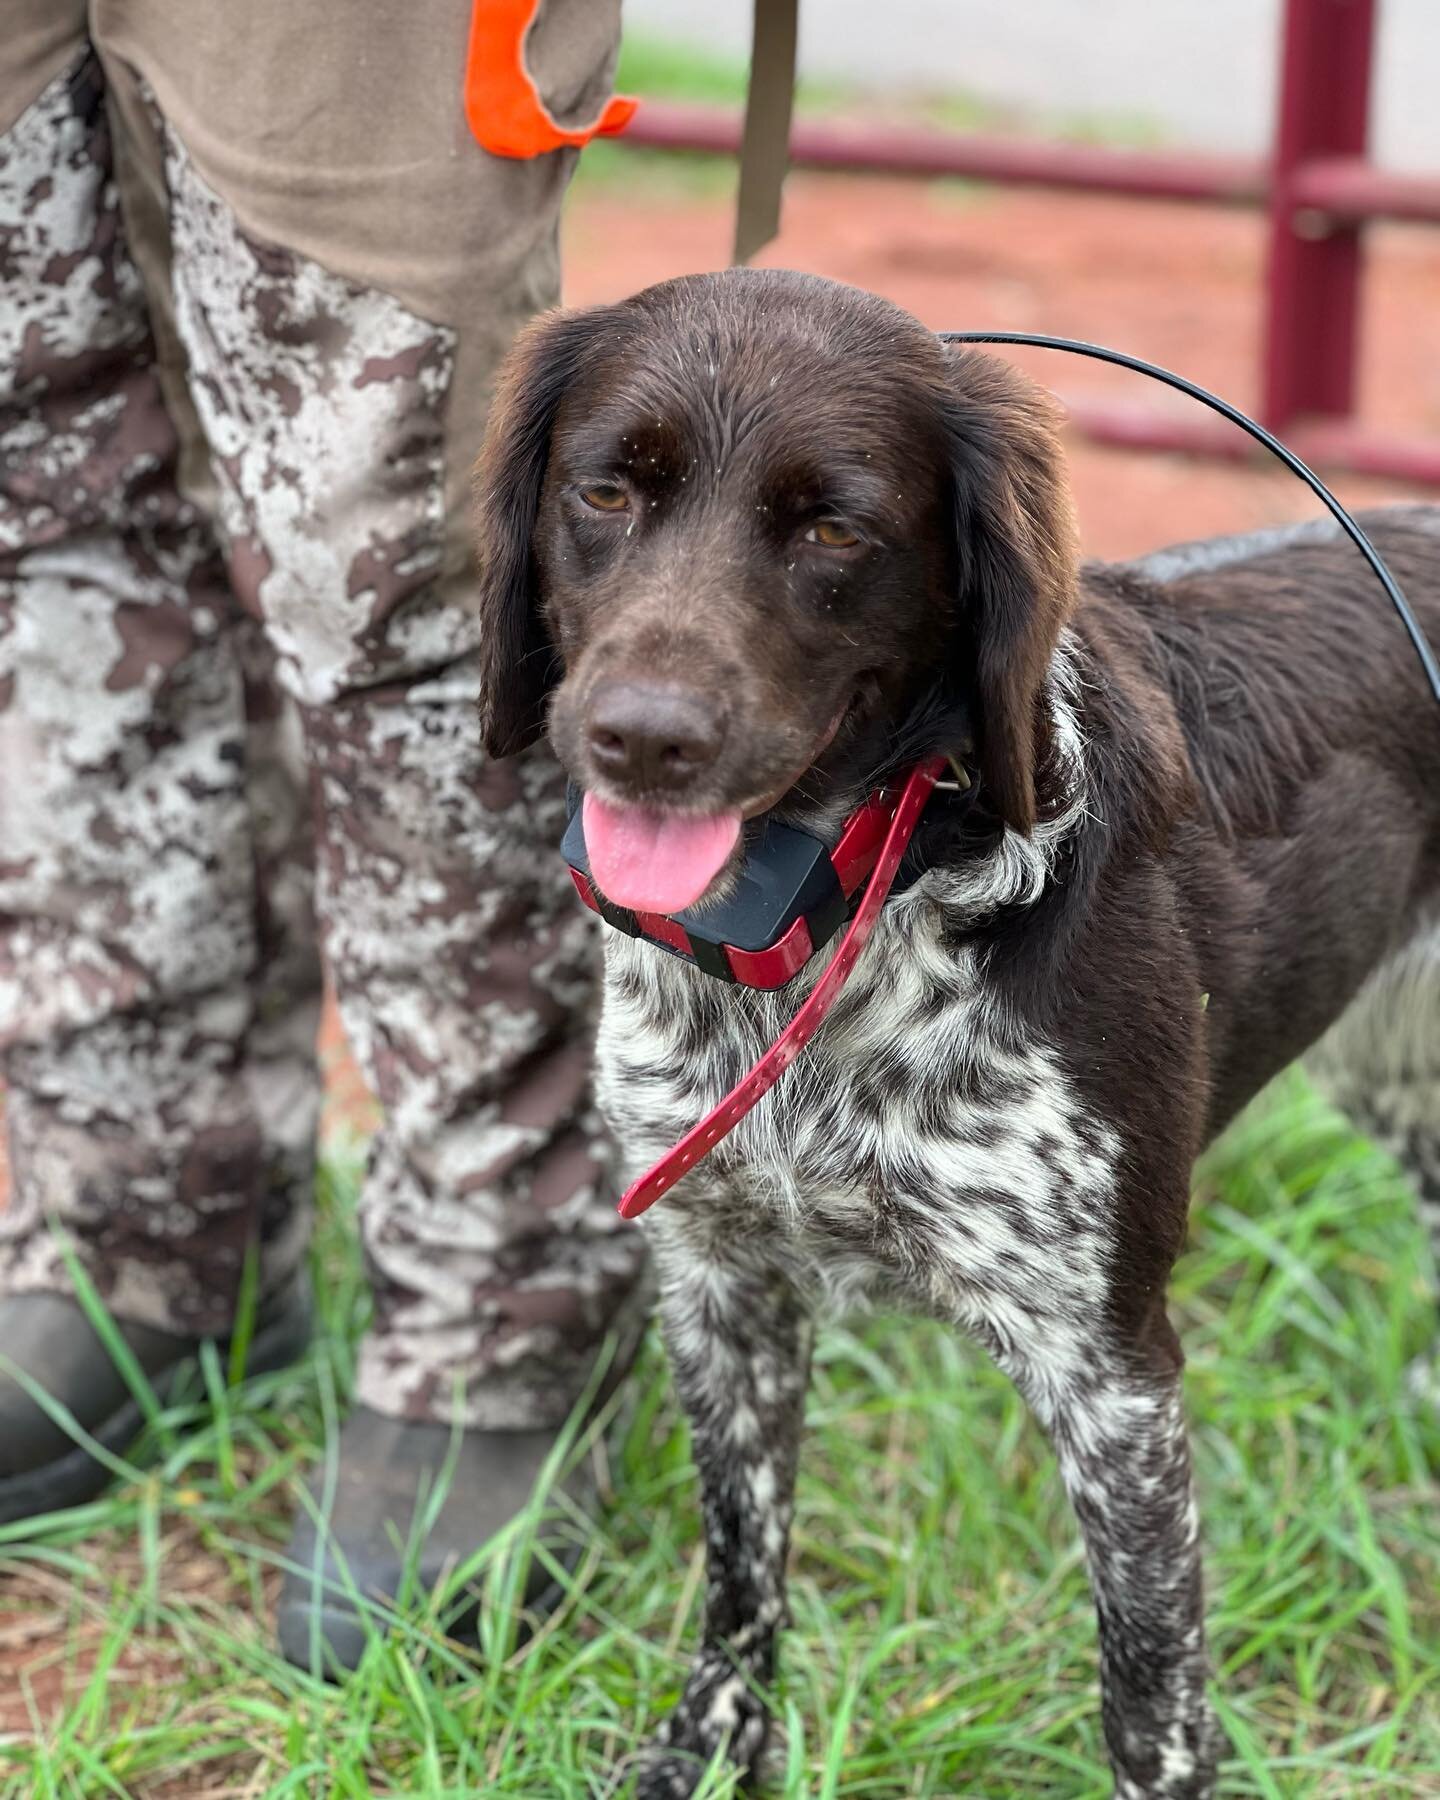 Happy 4th Birthday to Hazel @hazelthemunster ! 🥳 (Owner: Our Testing Director @saagalu ) How did Hazel spend her birthday, you ask? Hunting ducks this morning and training this afternoon. 🦆🕊️ 

_____________________________________________
#potoma